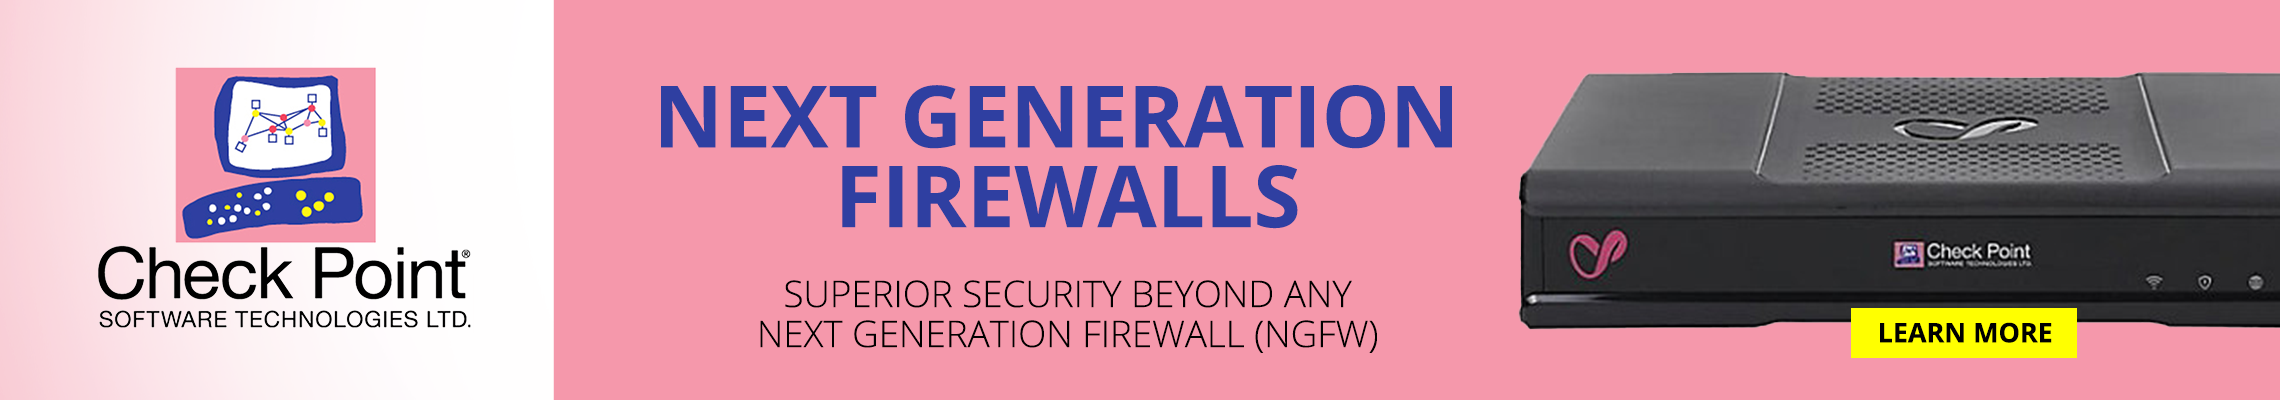 Check Point Small Business Firewalls